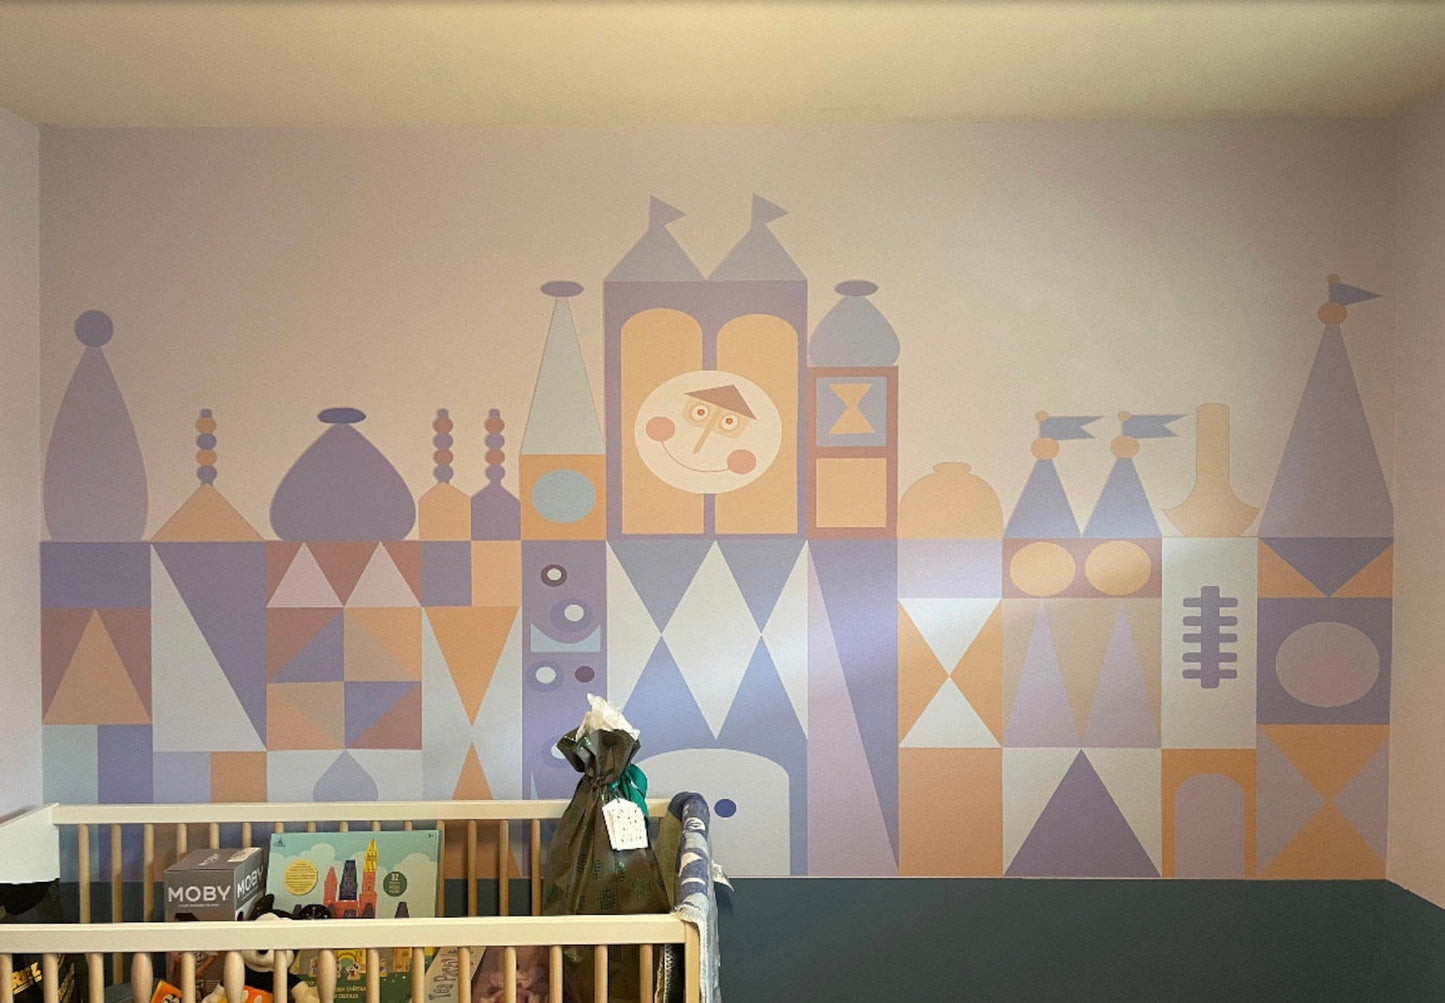 Small World 10ft Wall Decal